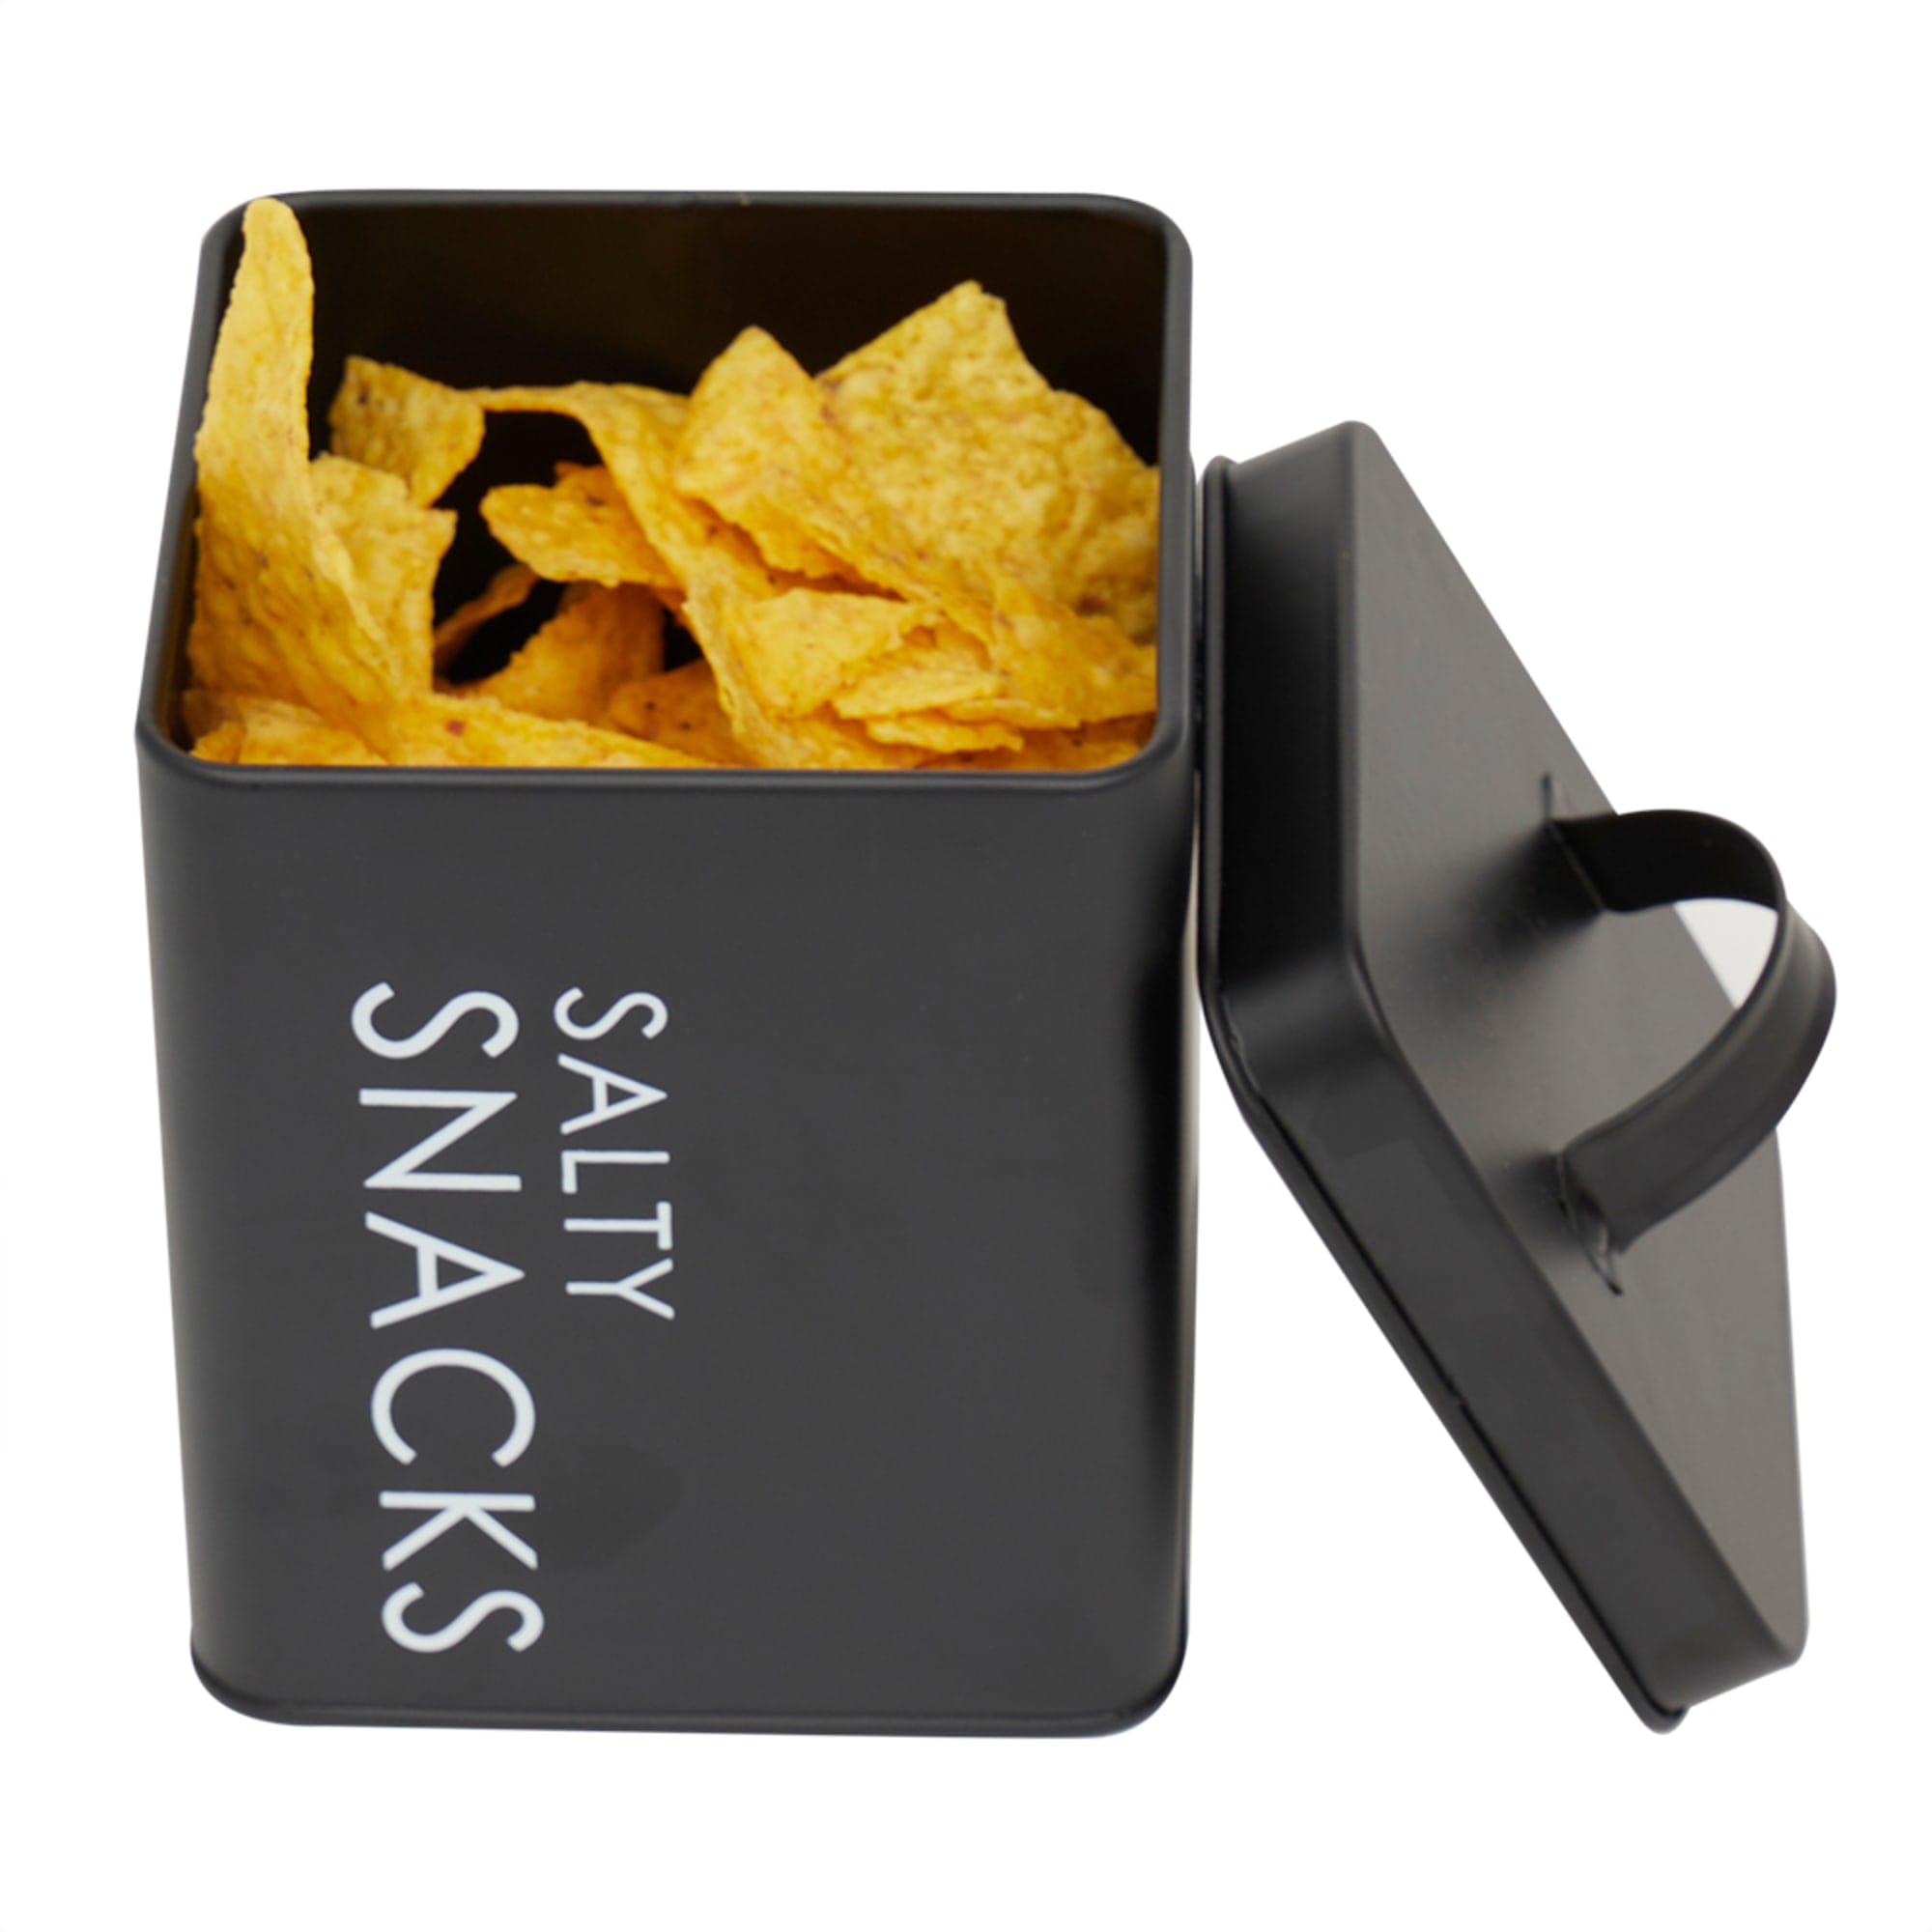 Home Basics Salty Snacks Tin Canister $3.00 EACH, CASE PACK OF 12